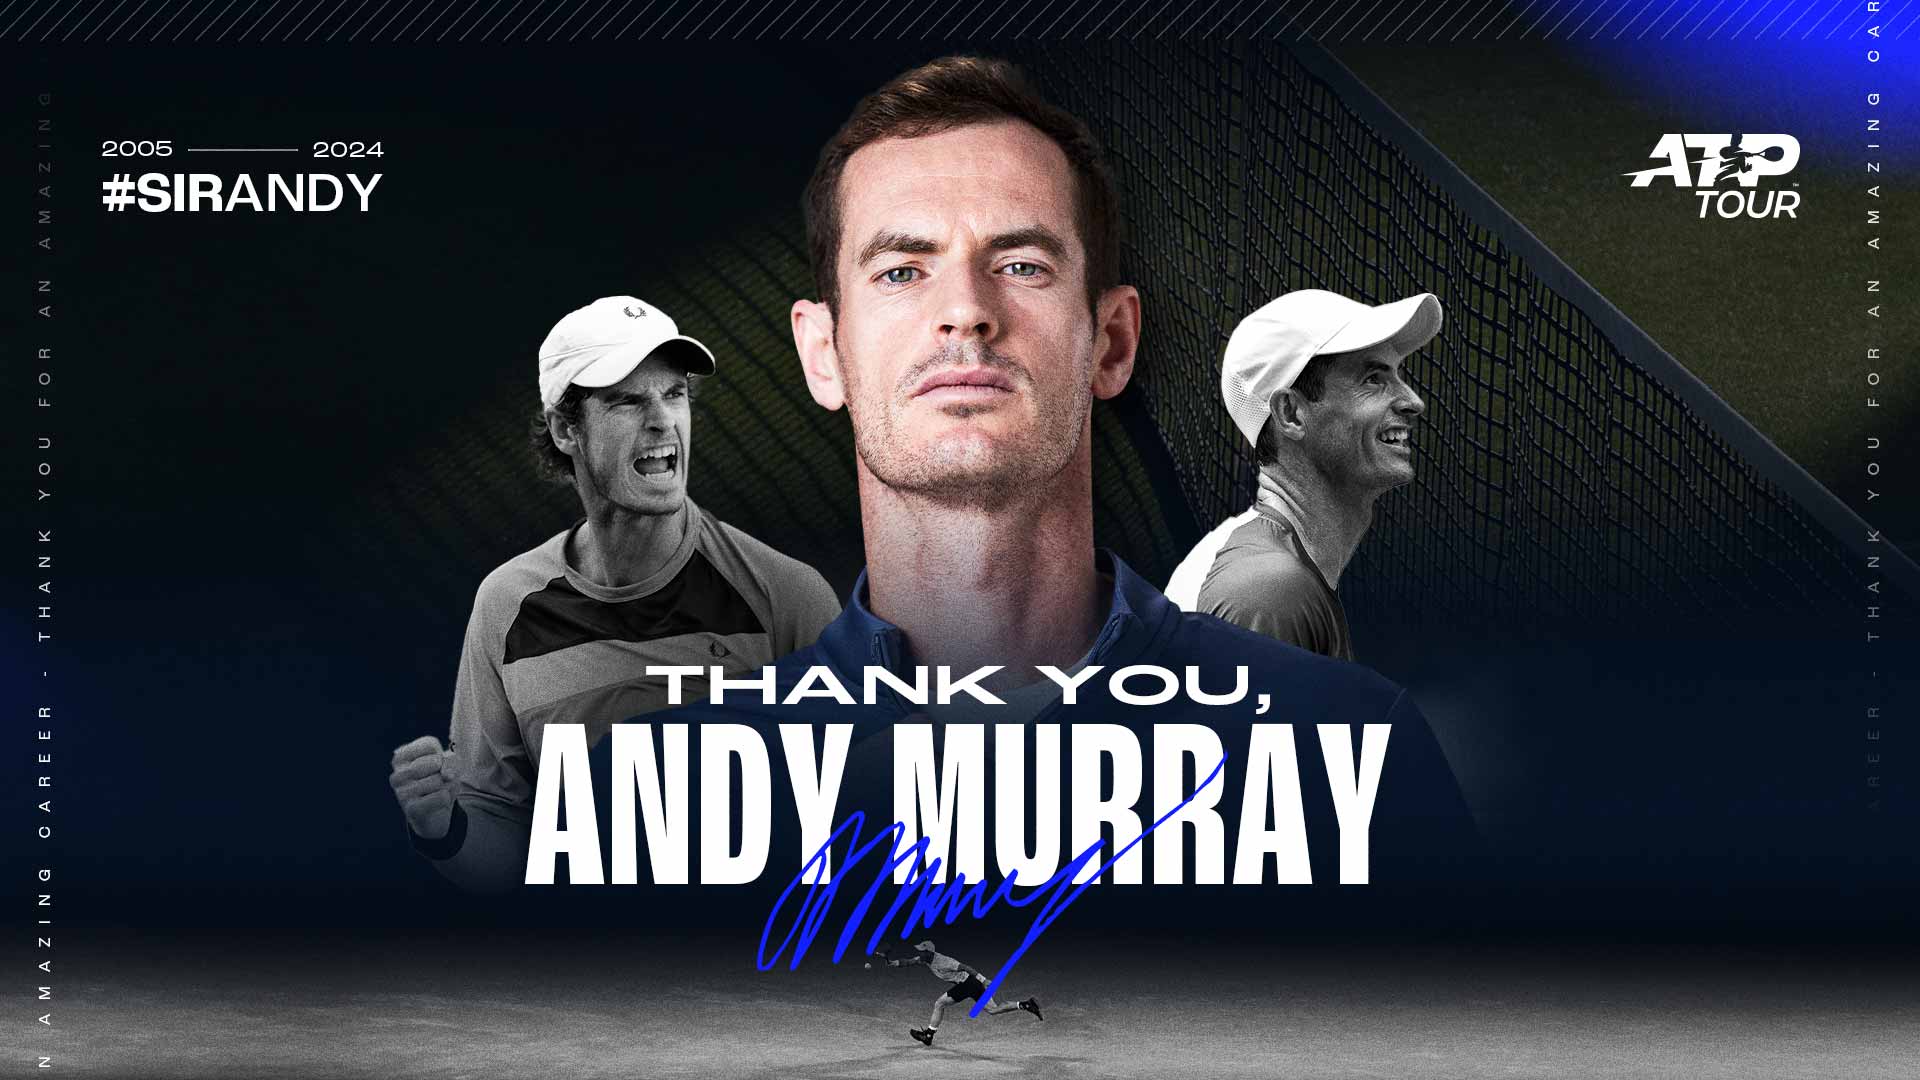 Andy Murray: A man for all people